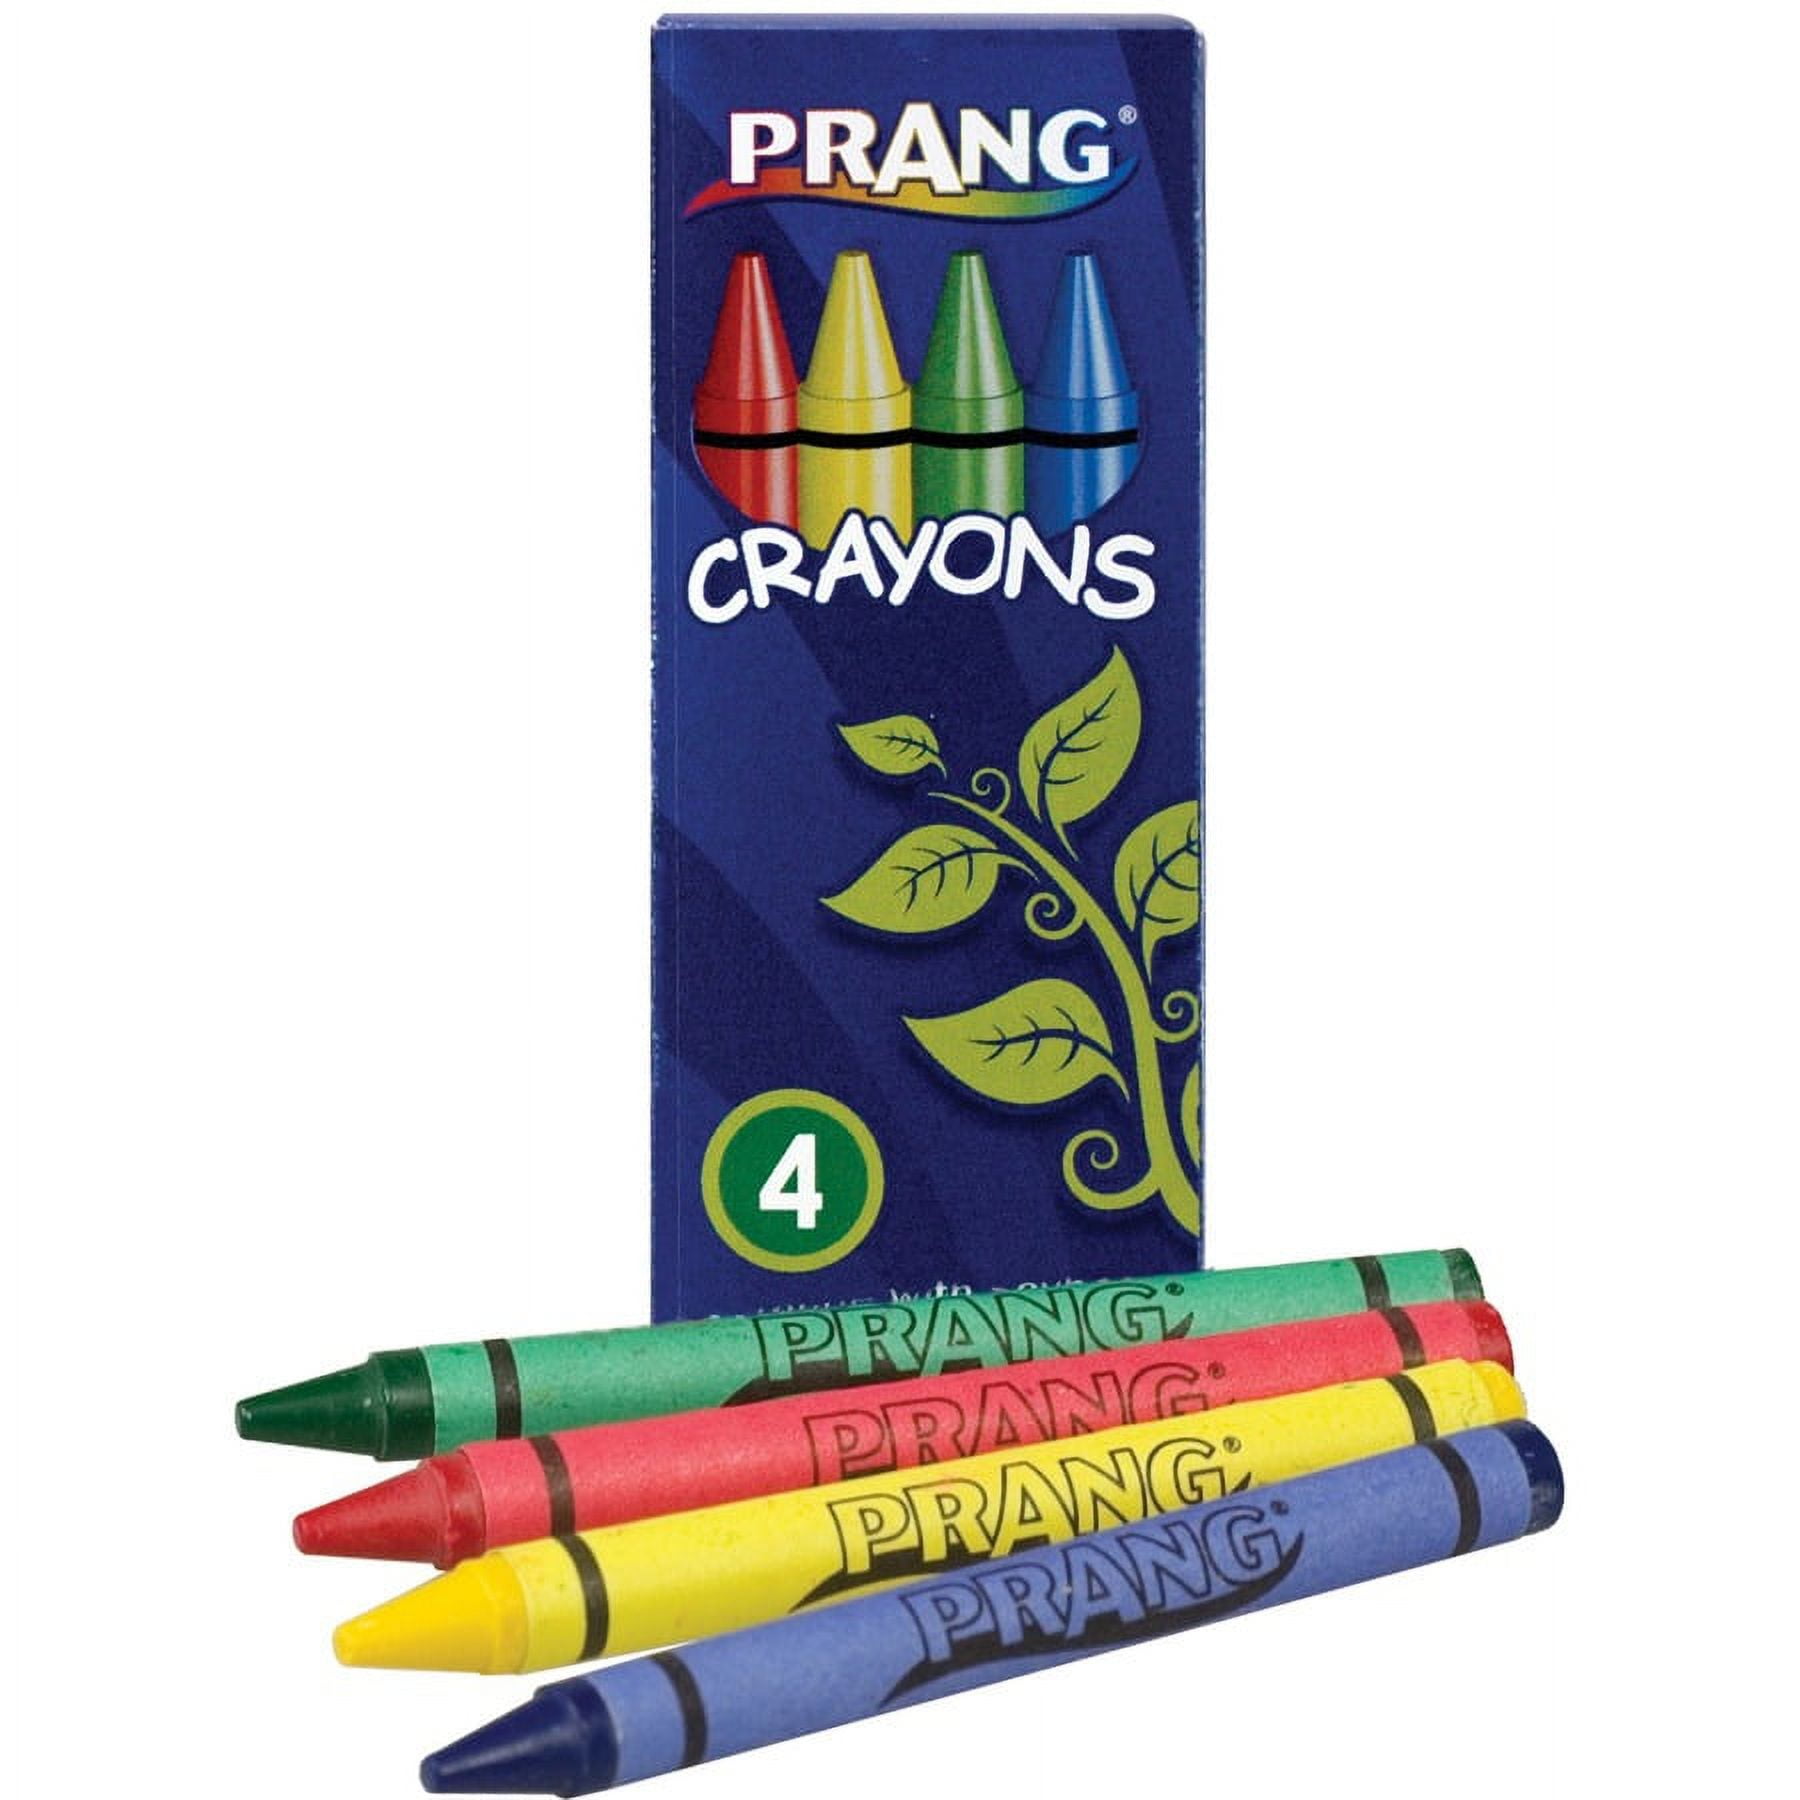 BAZIC Crayons 48-Count, Non Toxic Drawing Crayon (48/Pack), 1-Pack